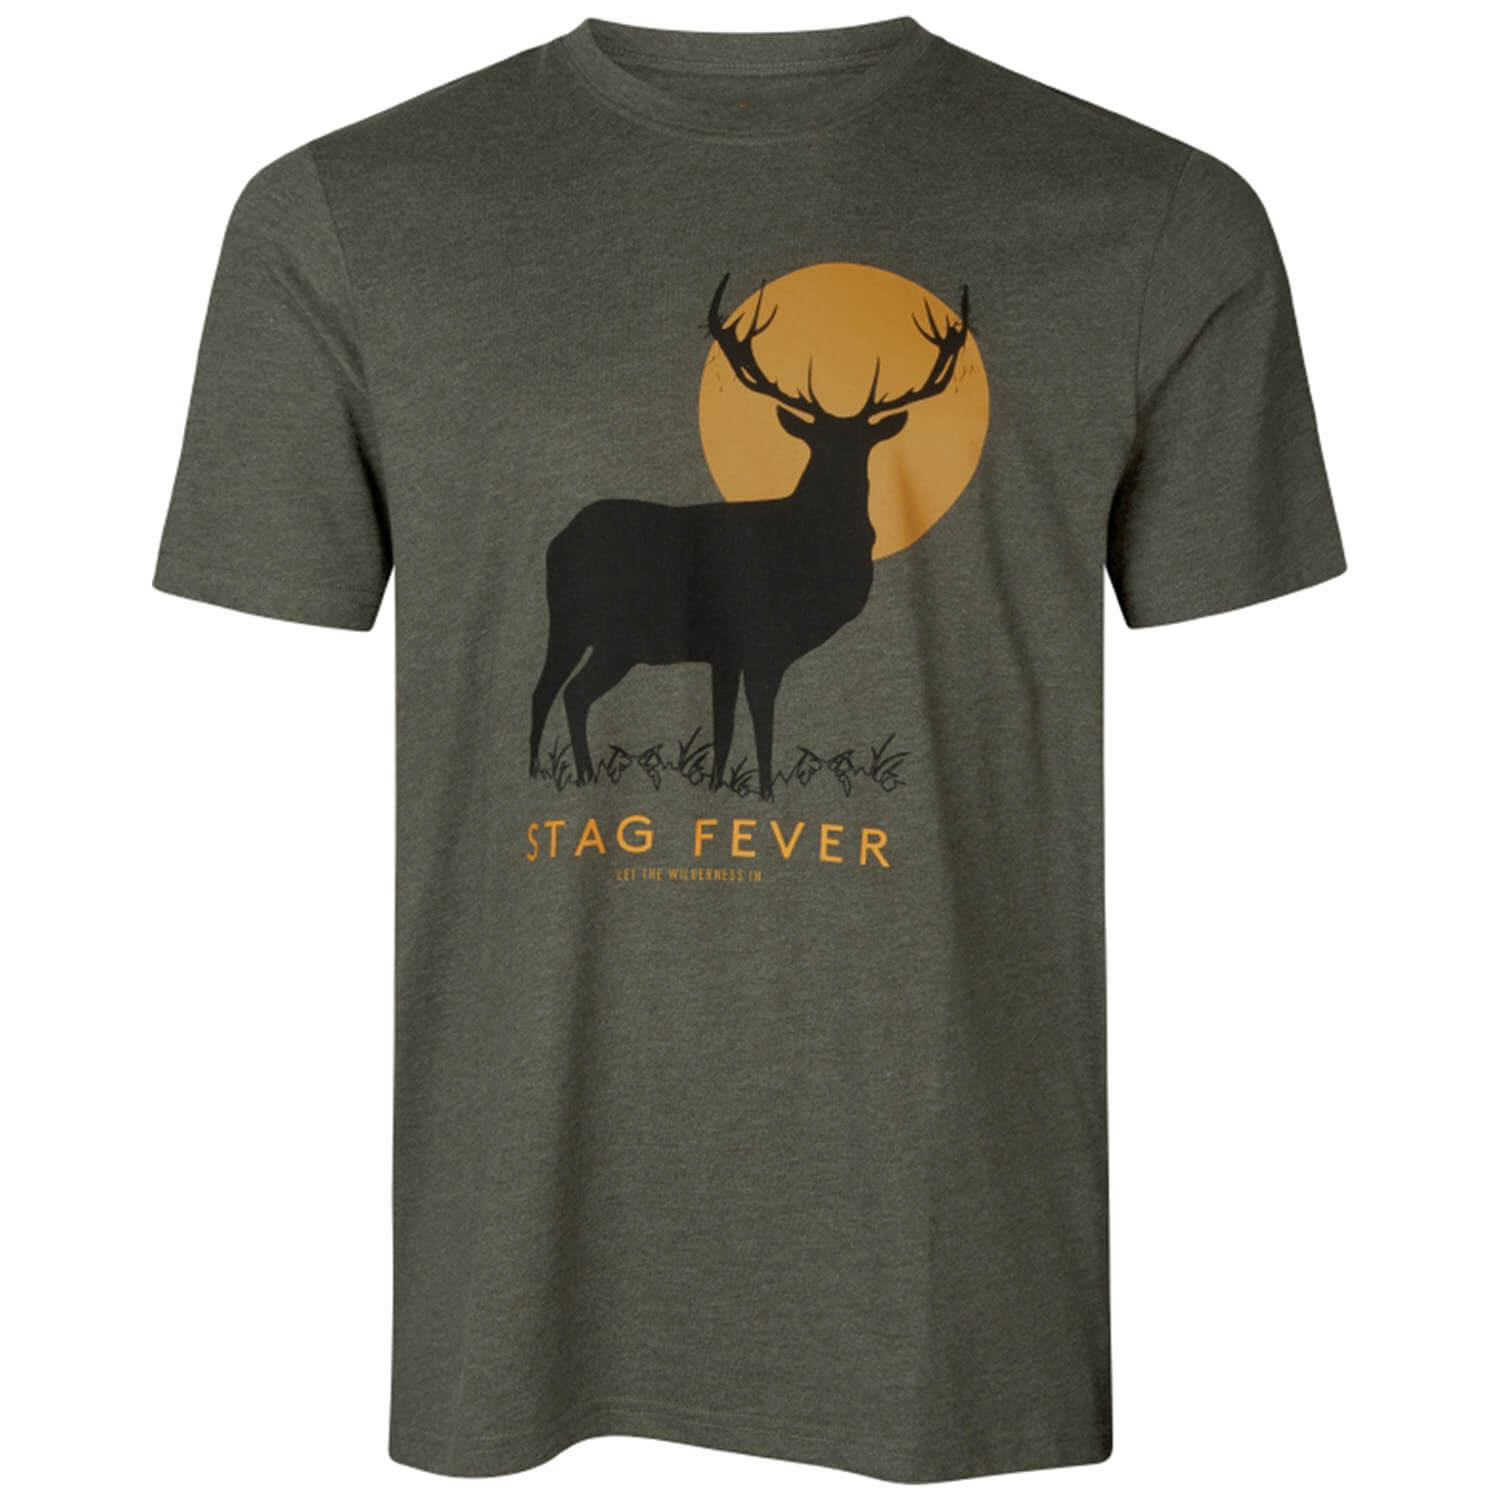 Seeland T-Shirt Stag Fever (Pine Green) - Shirts